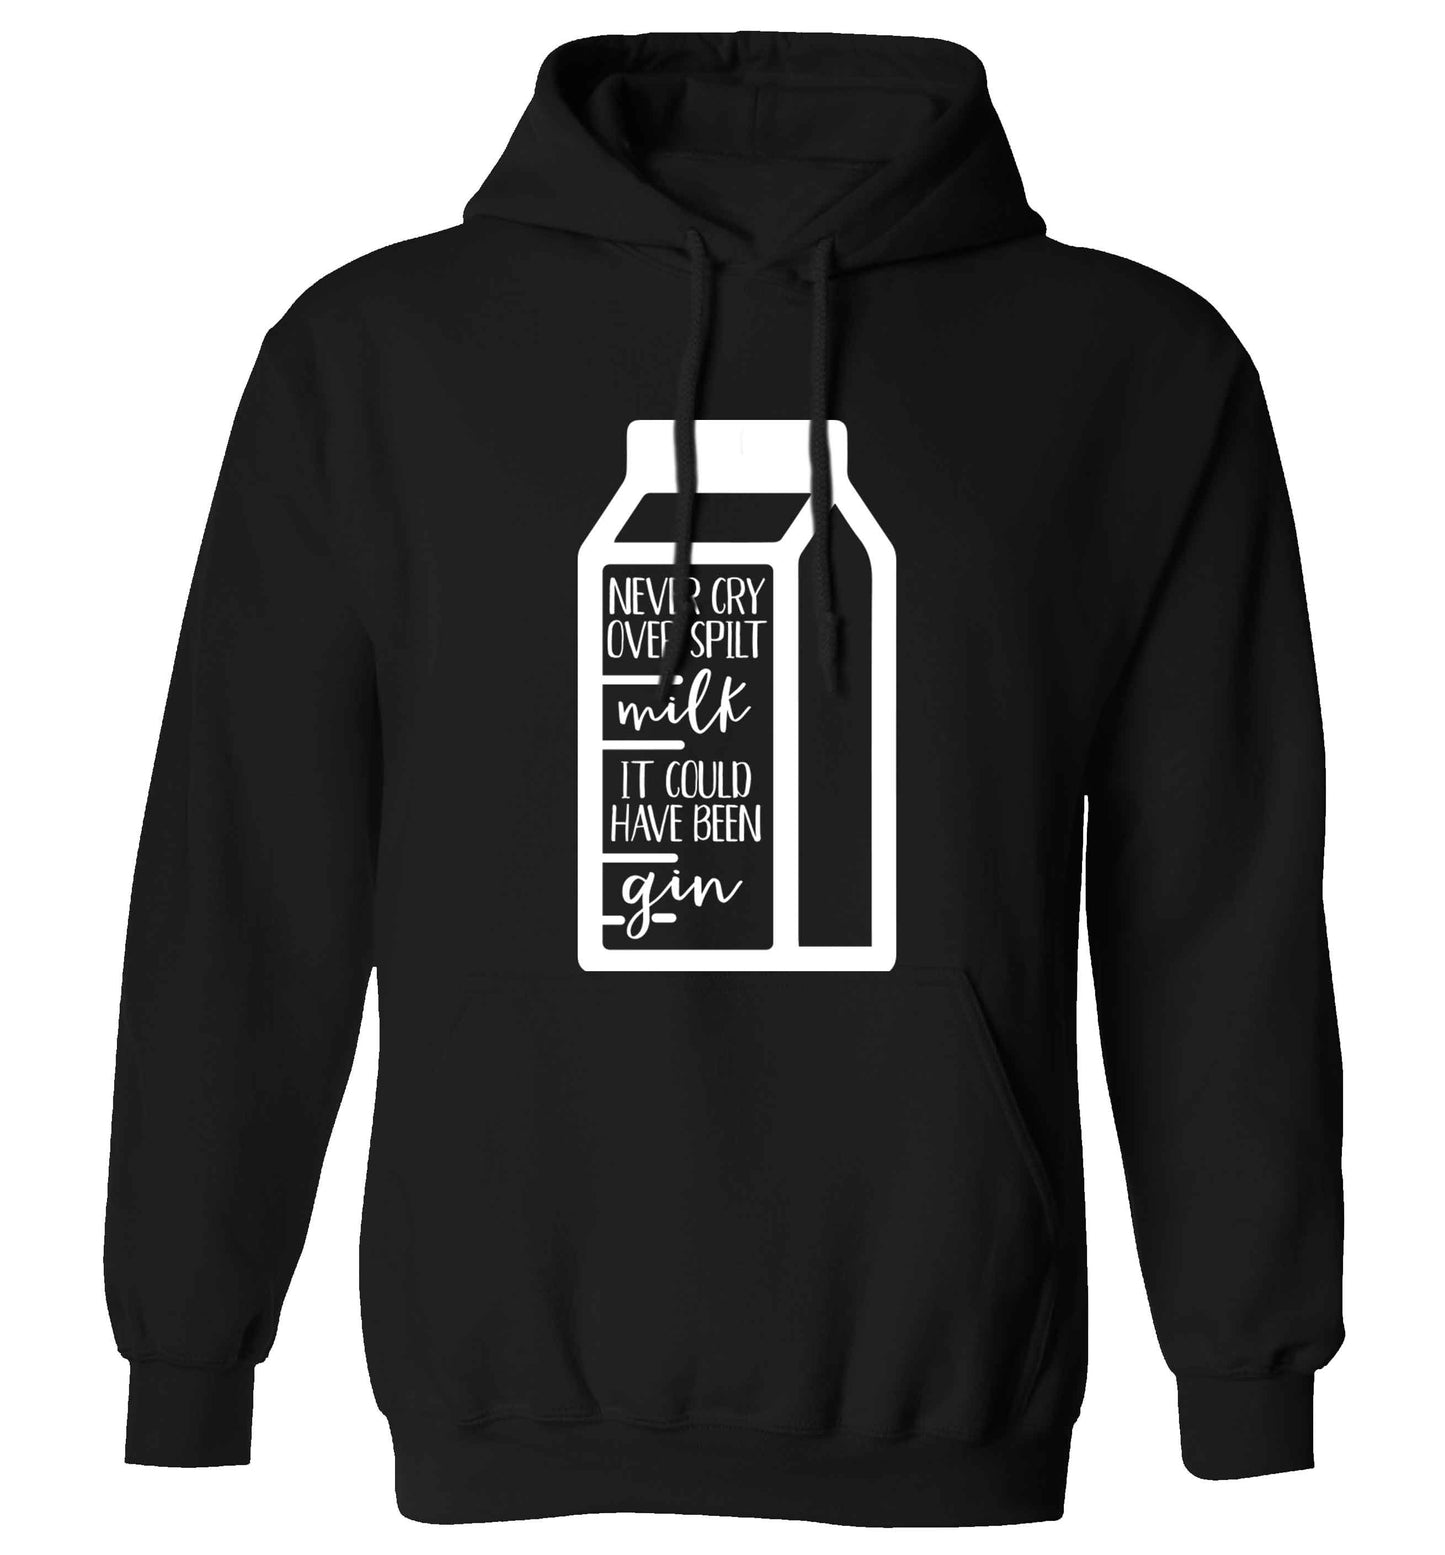 Never cry over spilt milk, it could have been gin adults unisex black hoodie 2XL